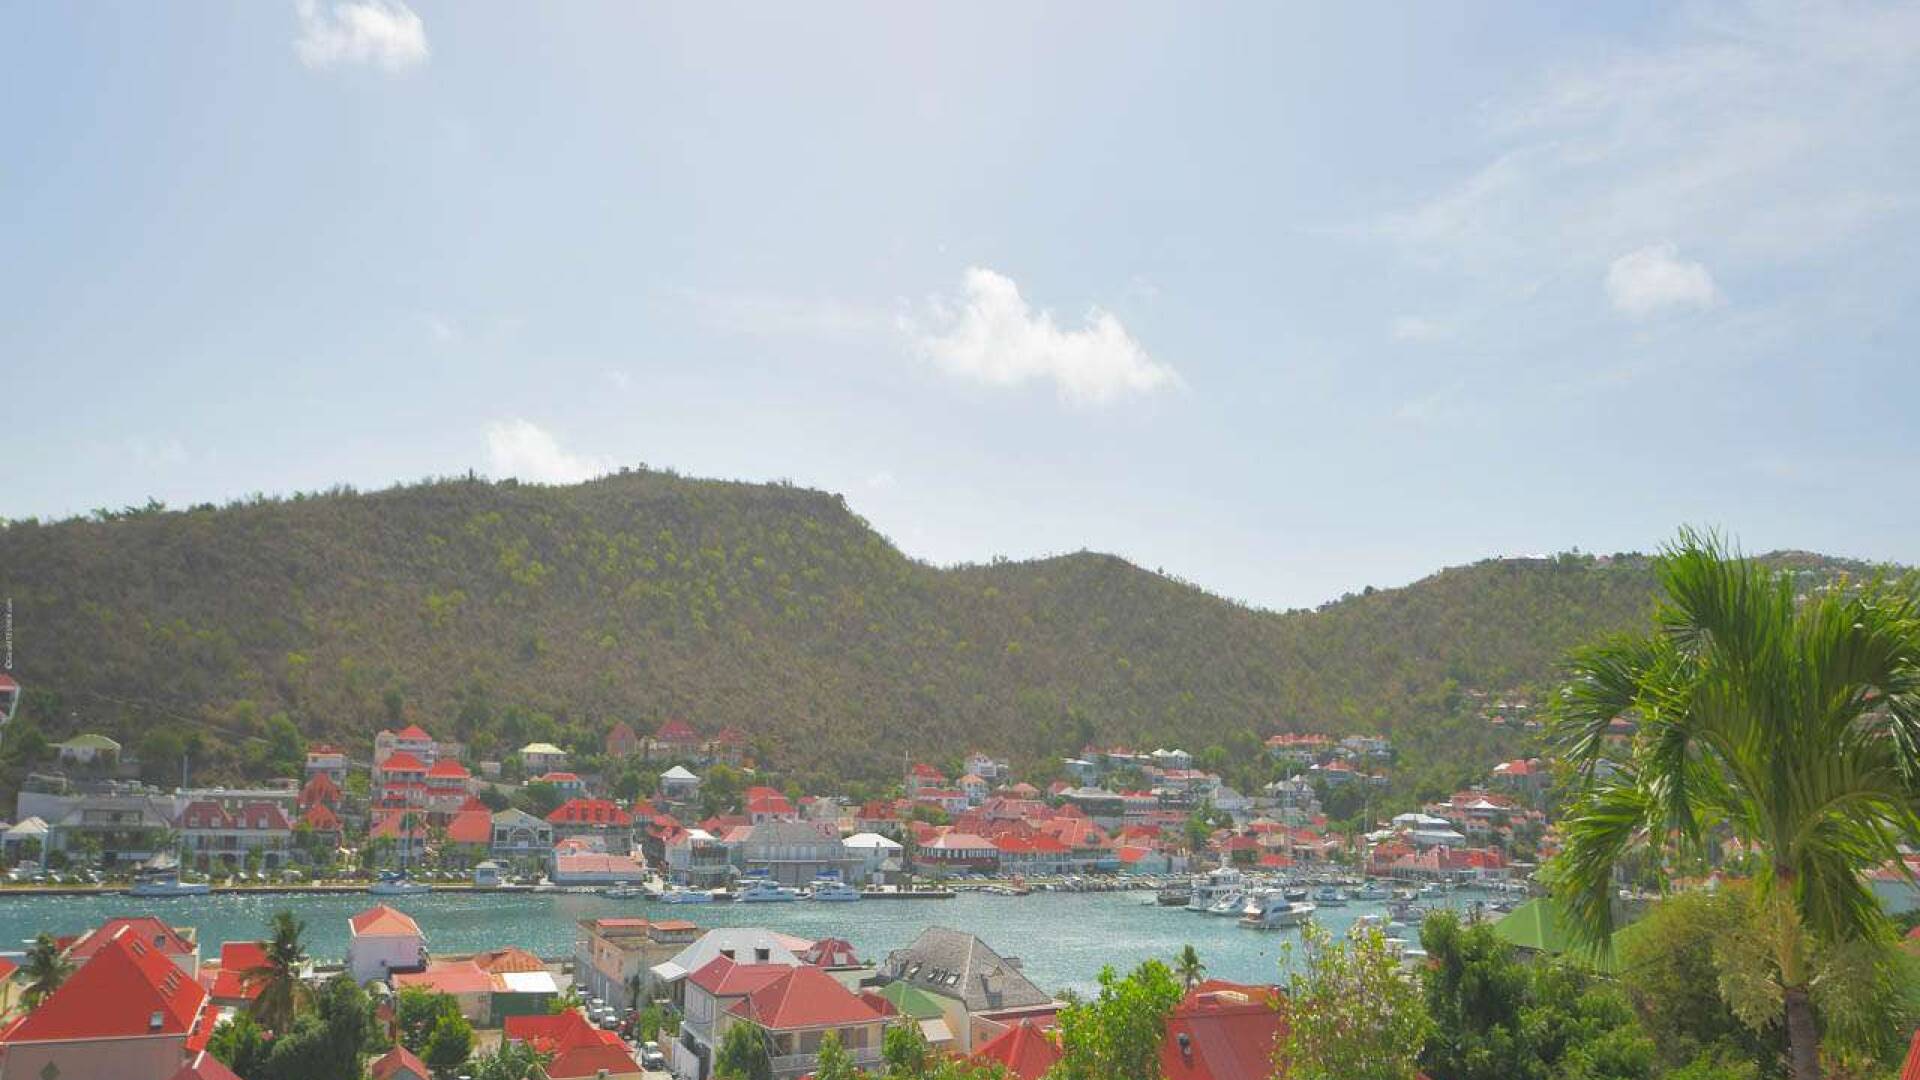 The view from WV VGV, Gustavia, St. Barthelemy